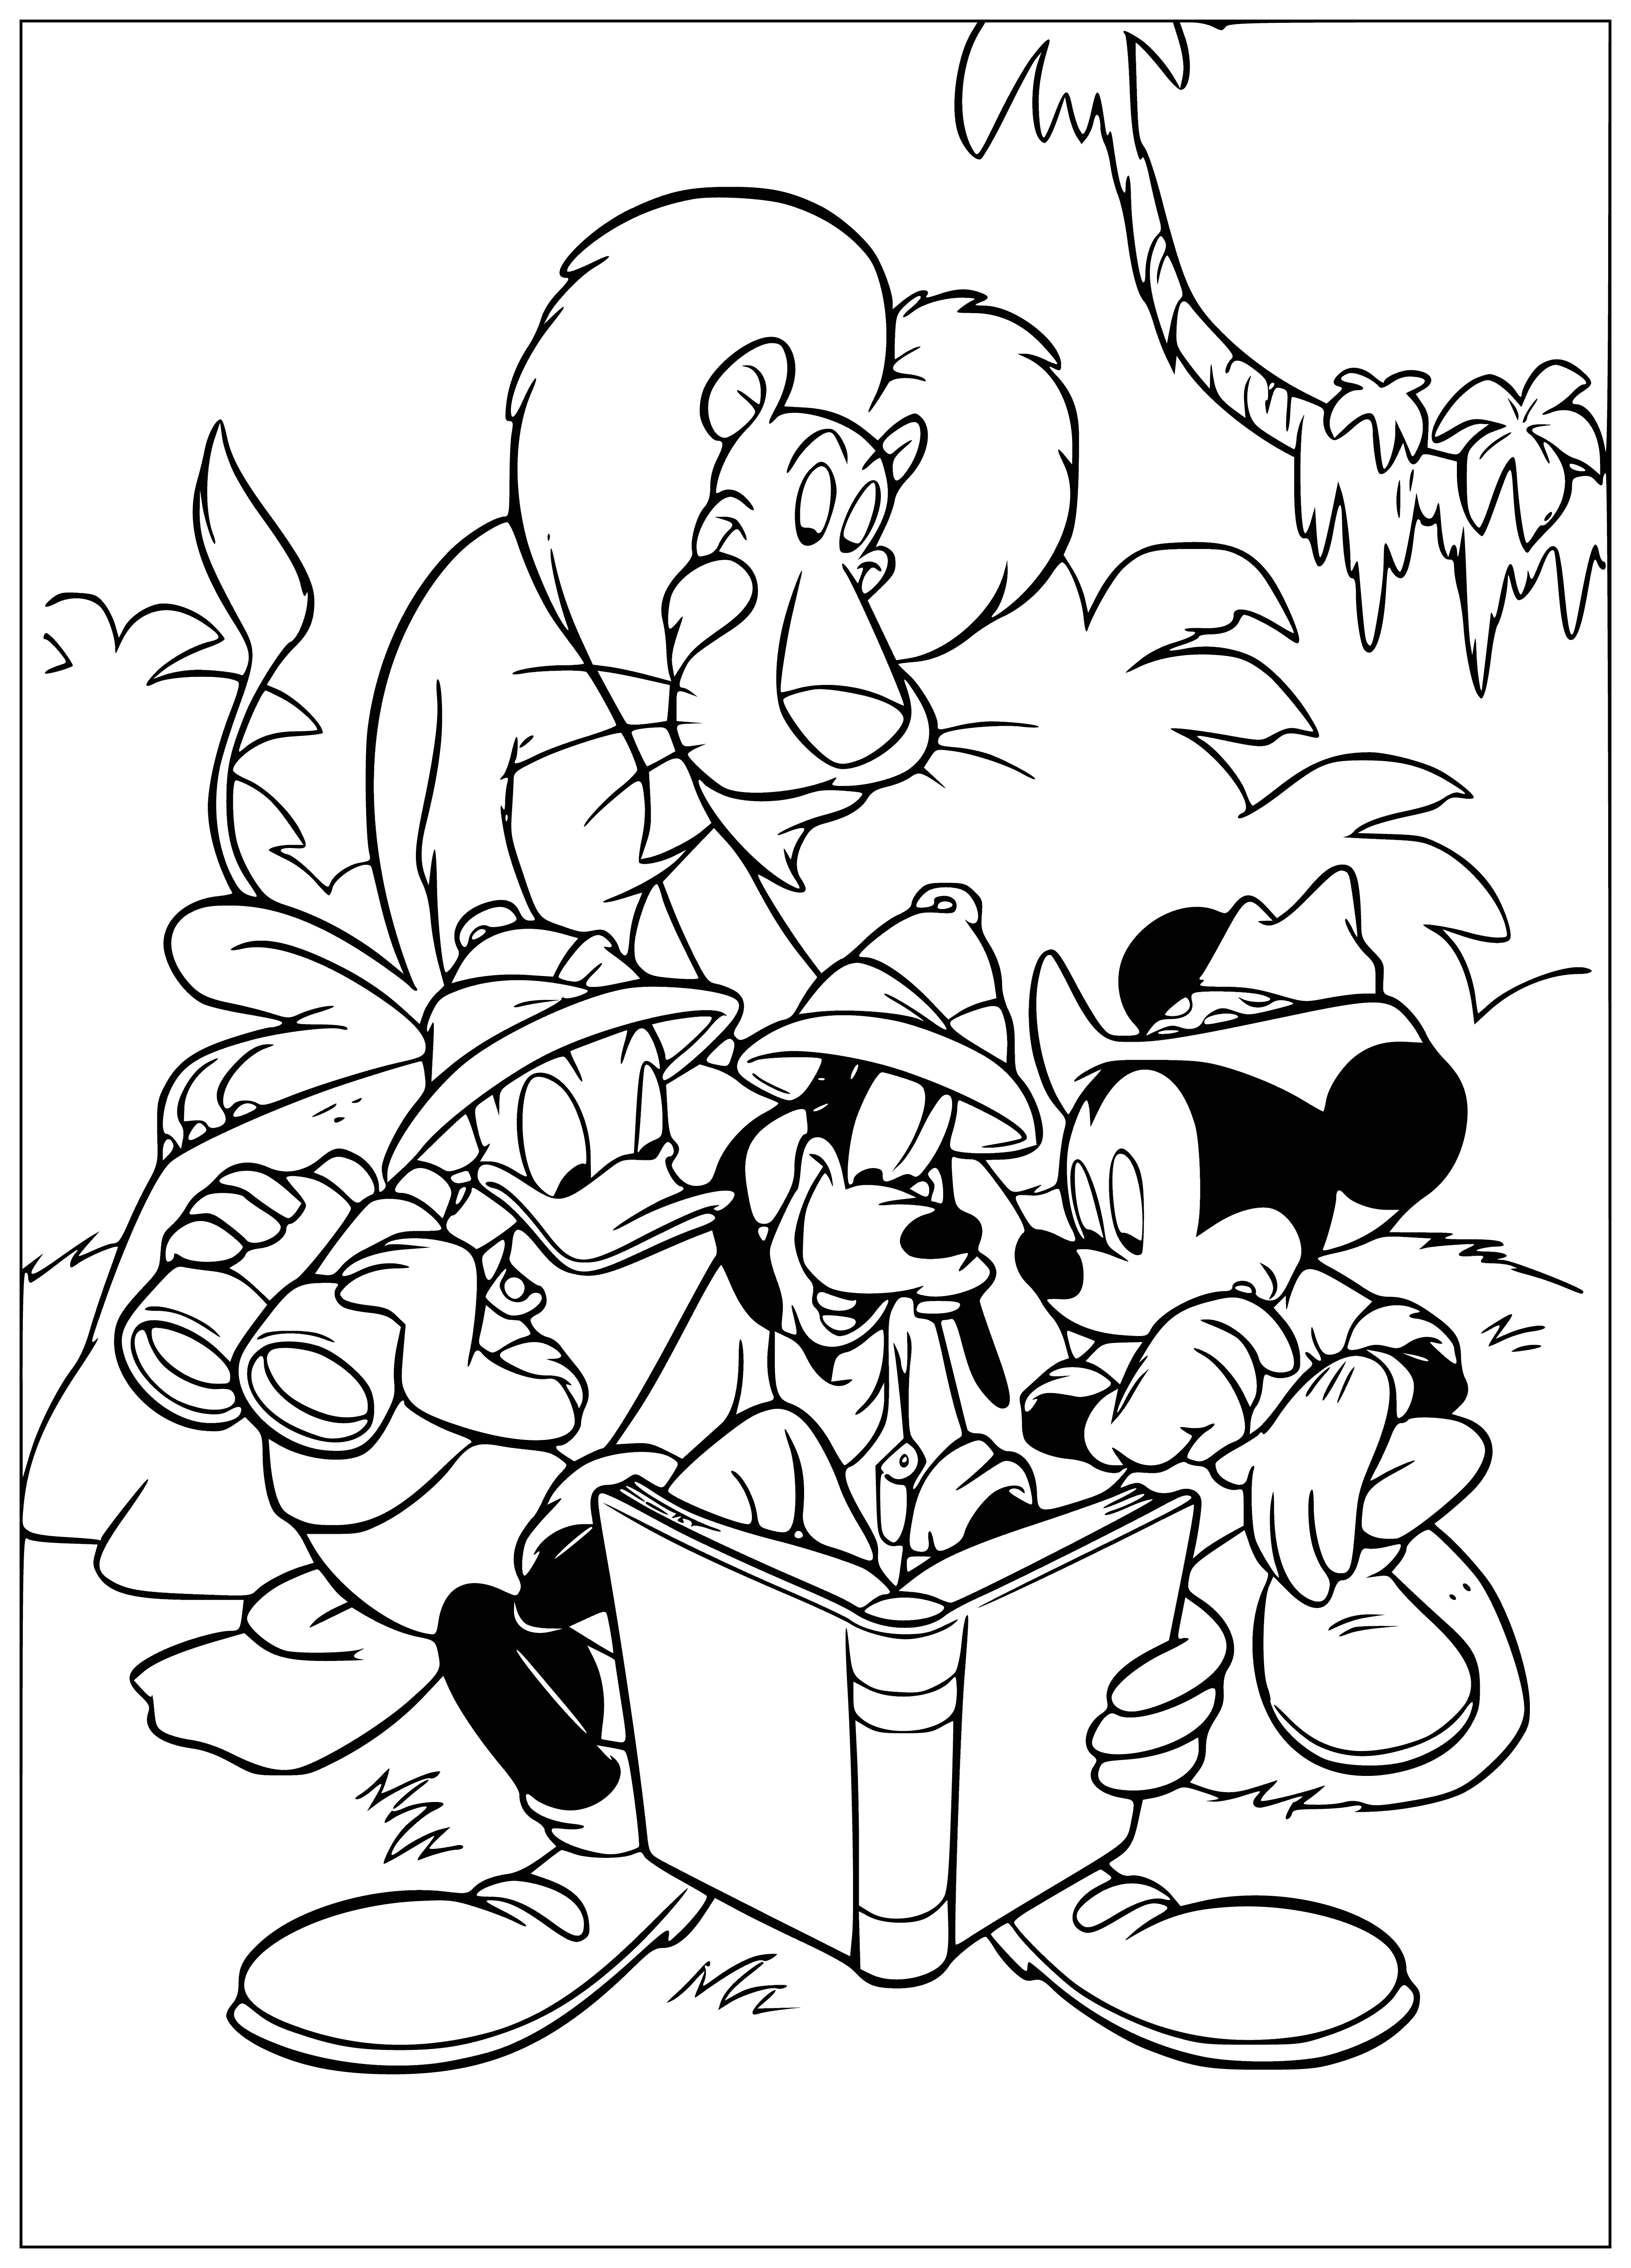 coloring page: 4 friends wave goodbye to unseen person in front of a big red door in a Mickey Mouse coloring page.